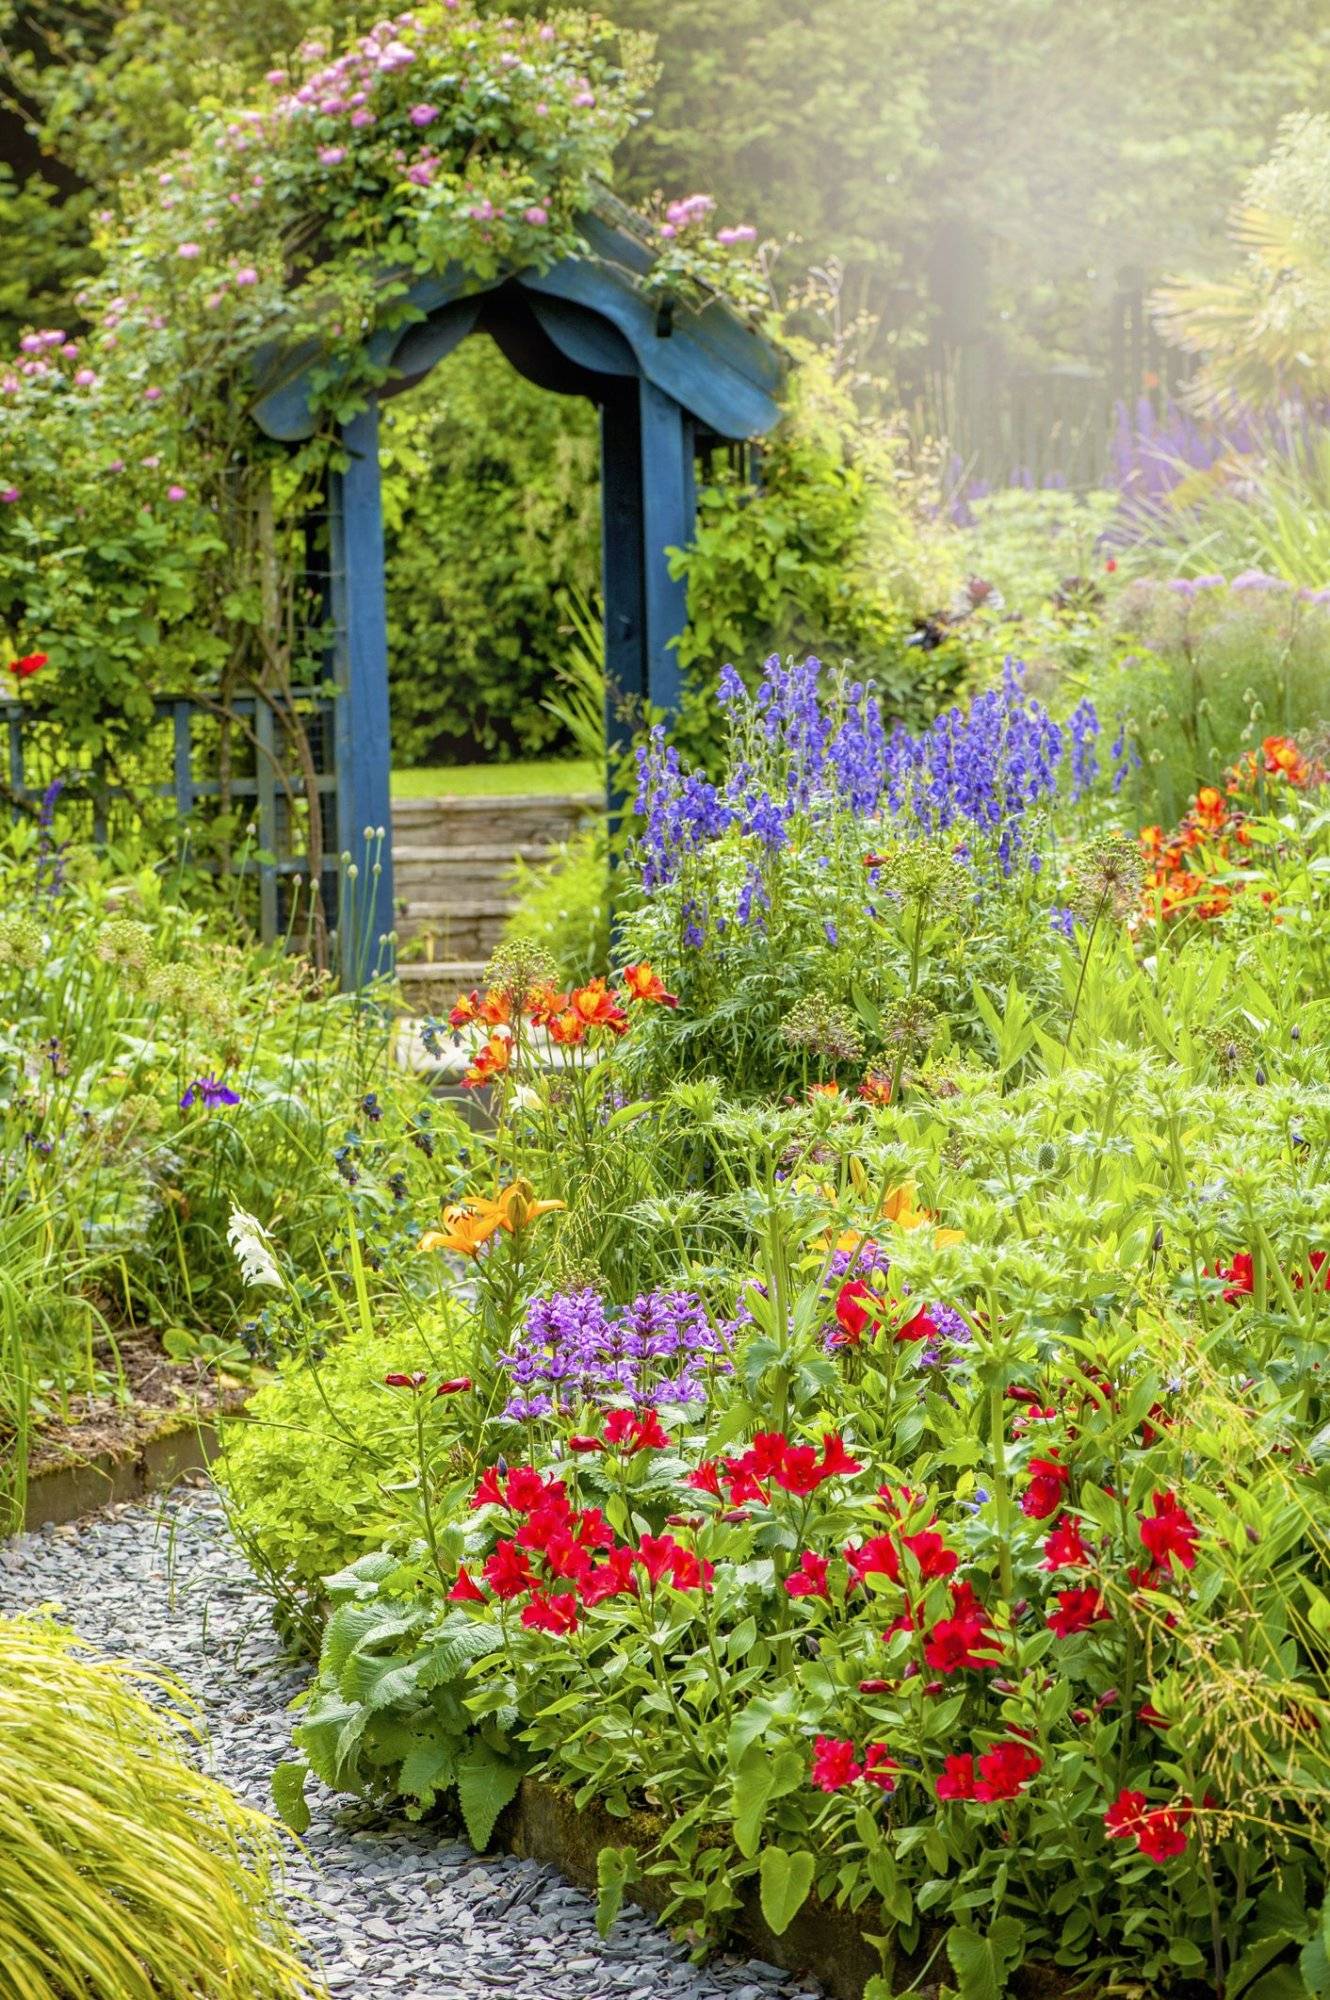 25 Stunning Images To Ignite Your Spring Garden Inspiration - 161